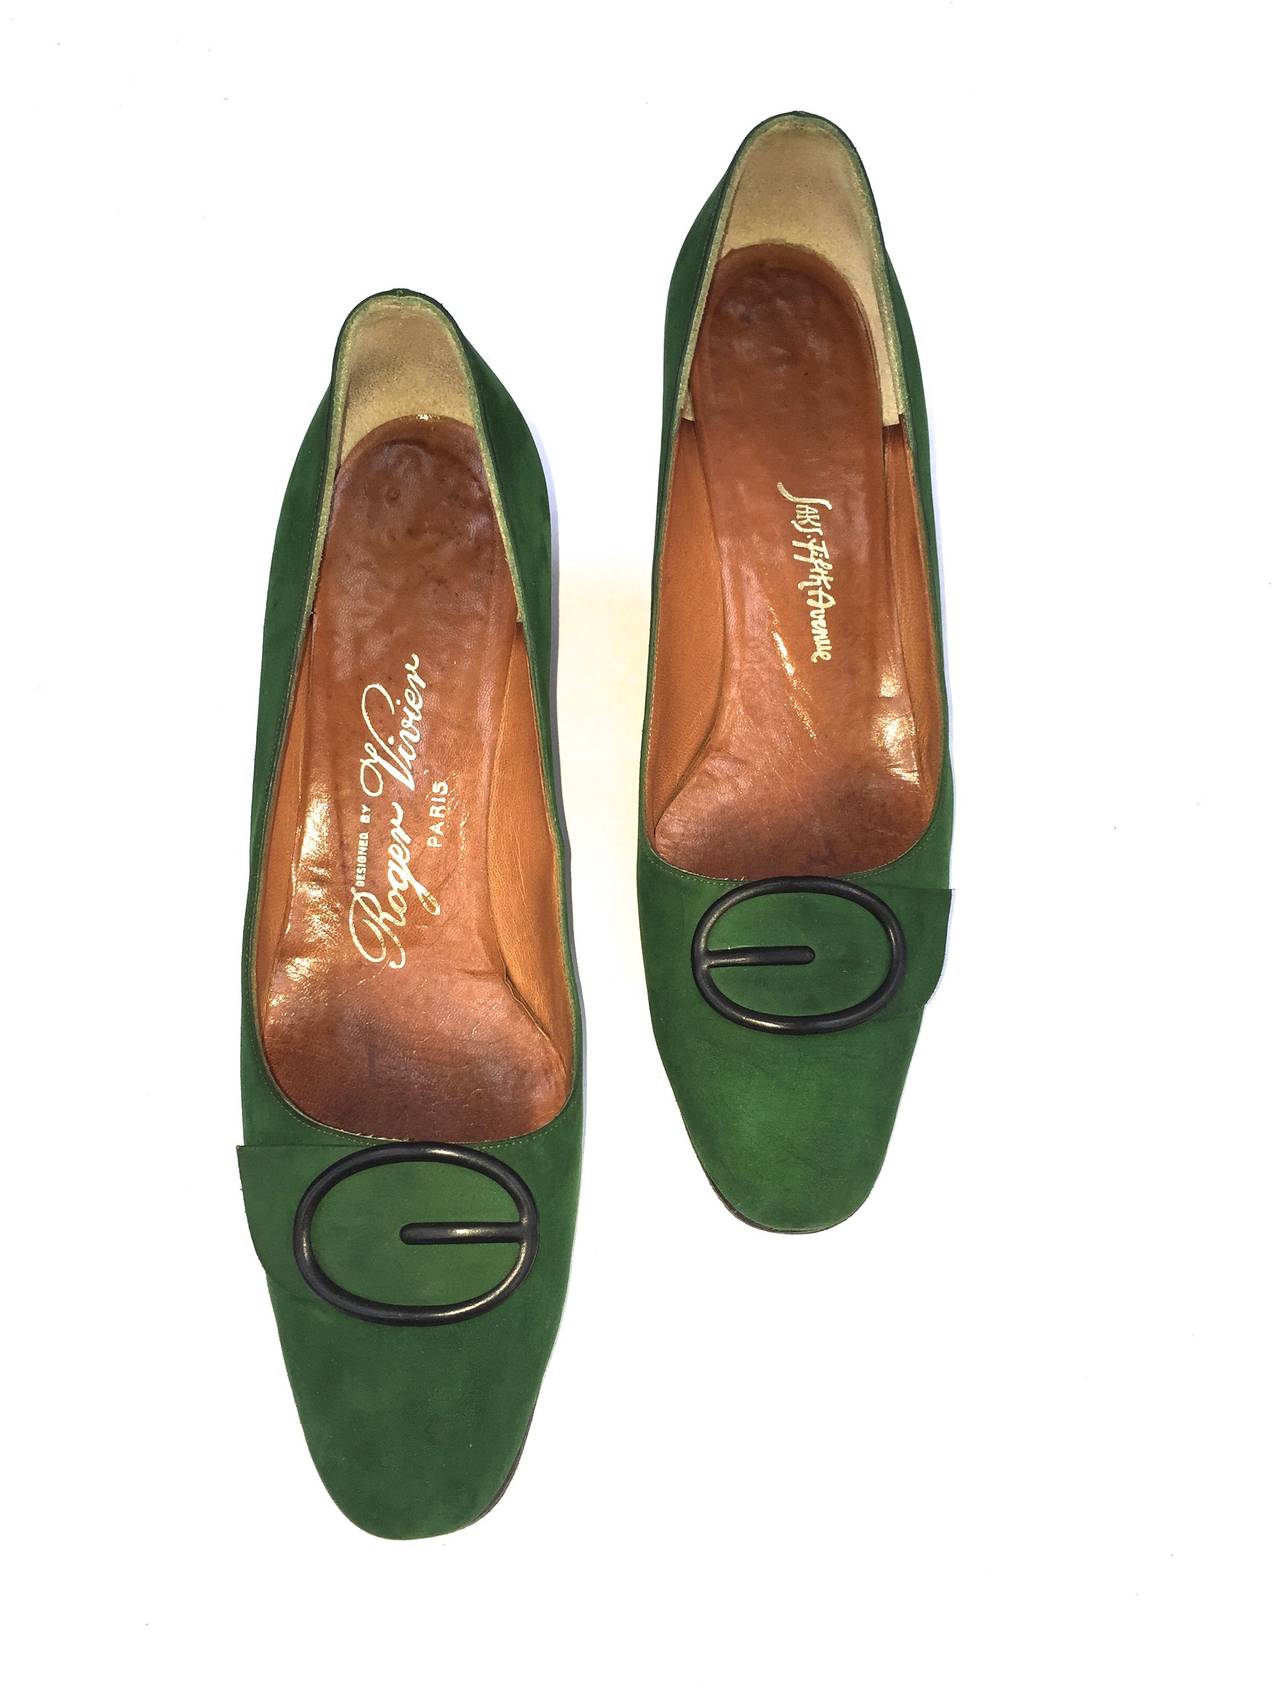 Roger Vivier for Sak's Fifth Avenue 60s green suede heels size 8AA. For Sale 5